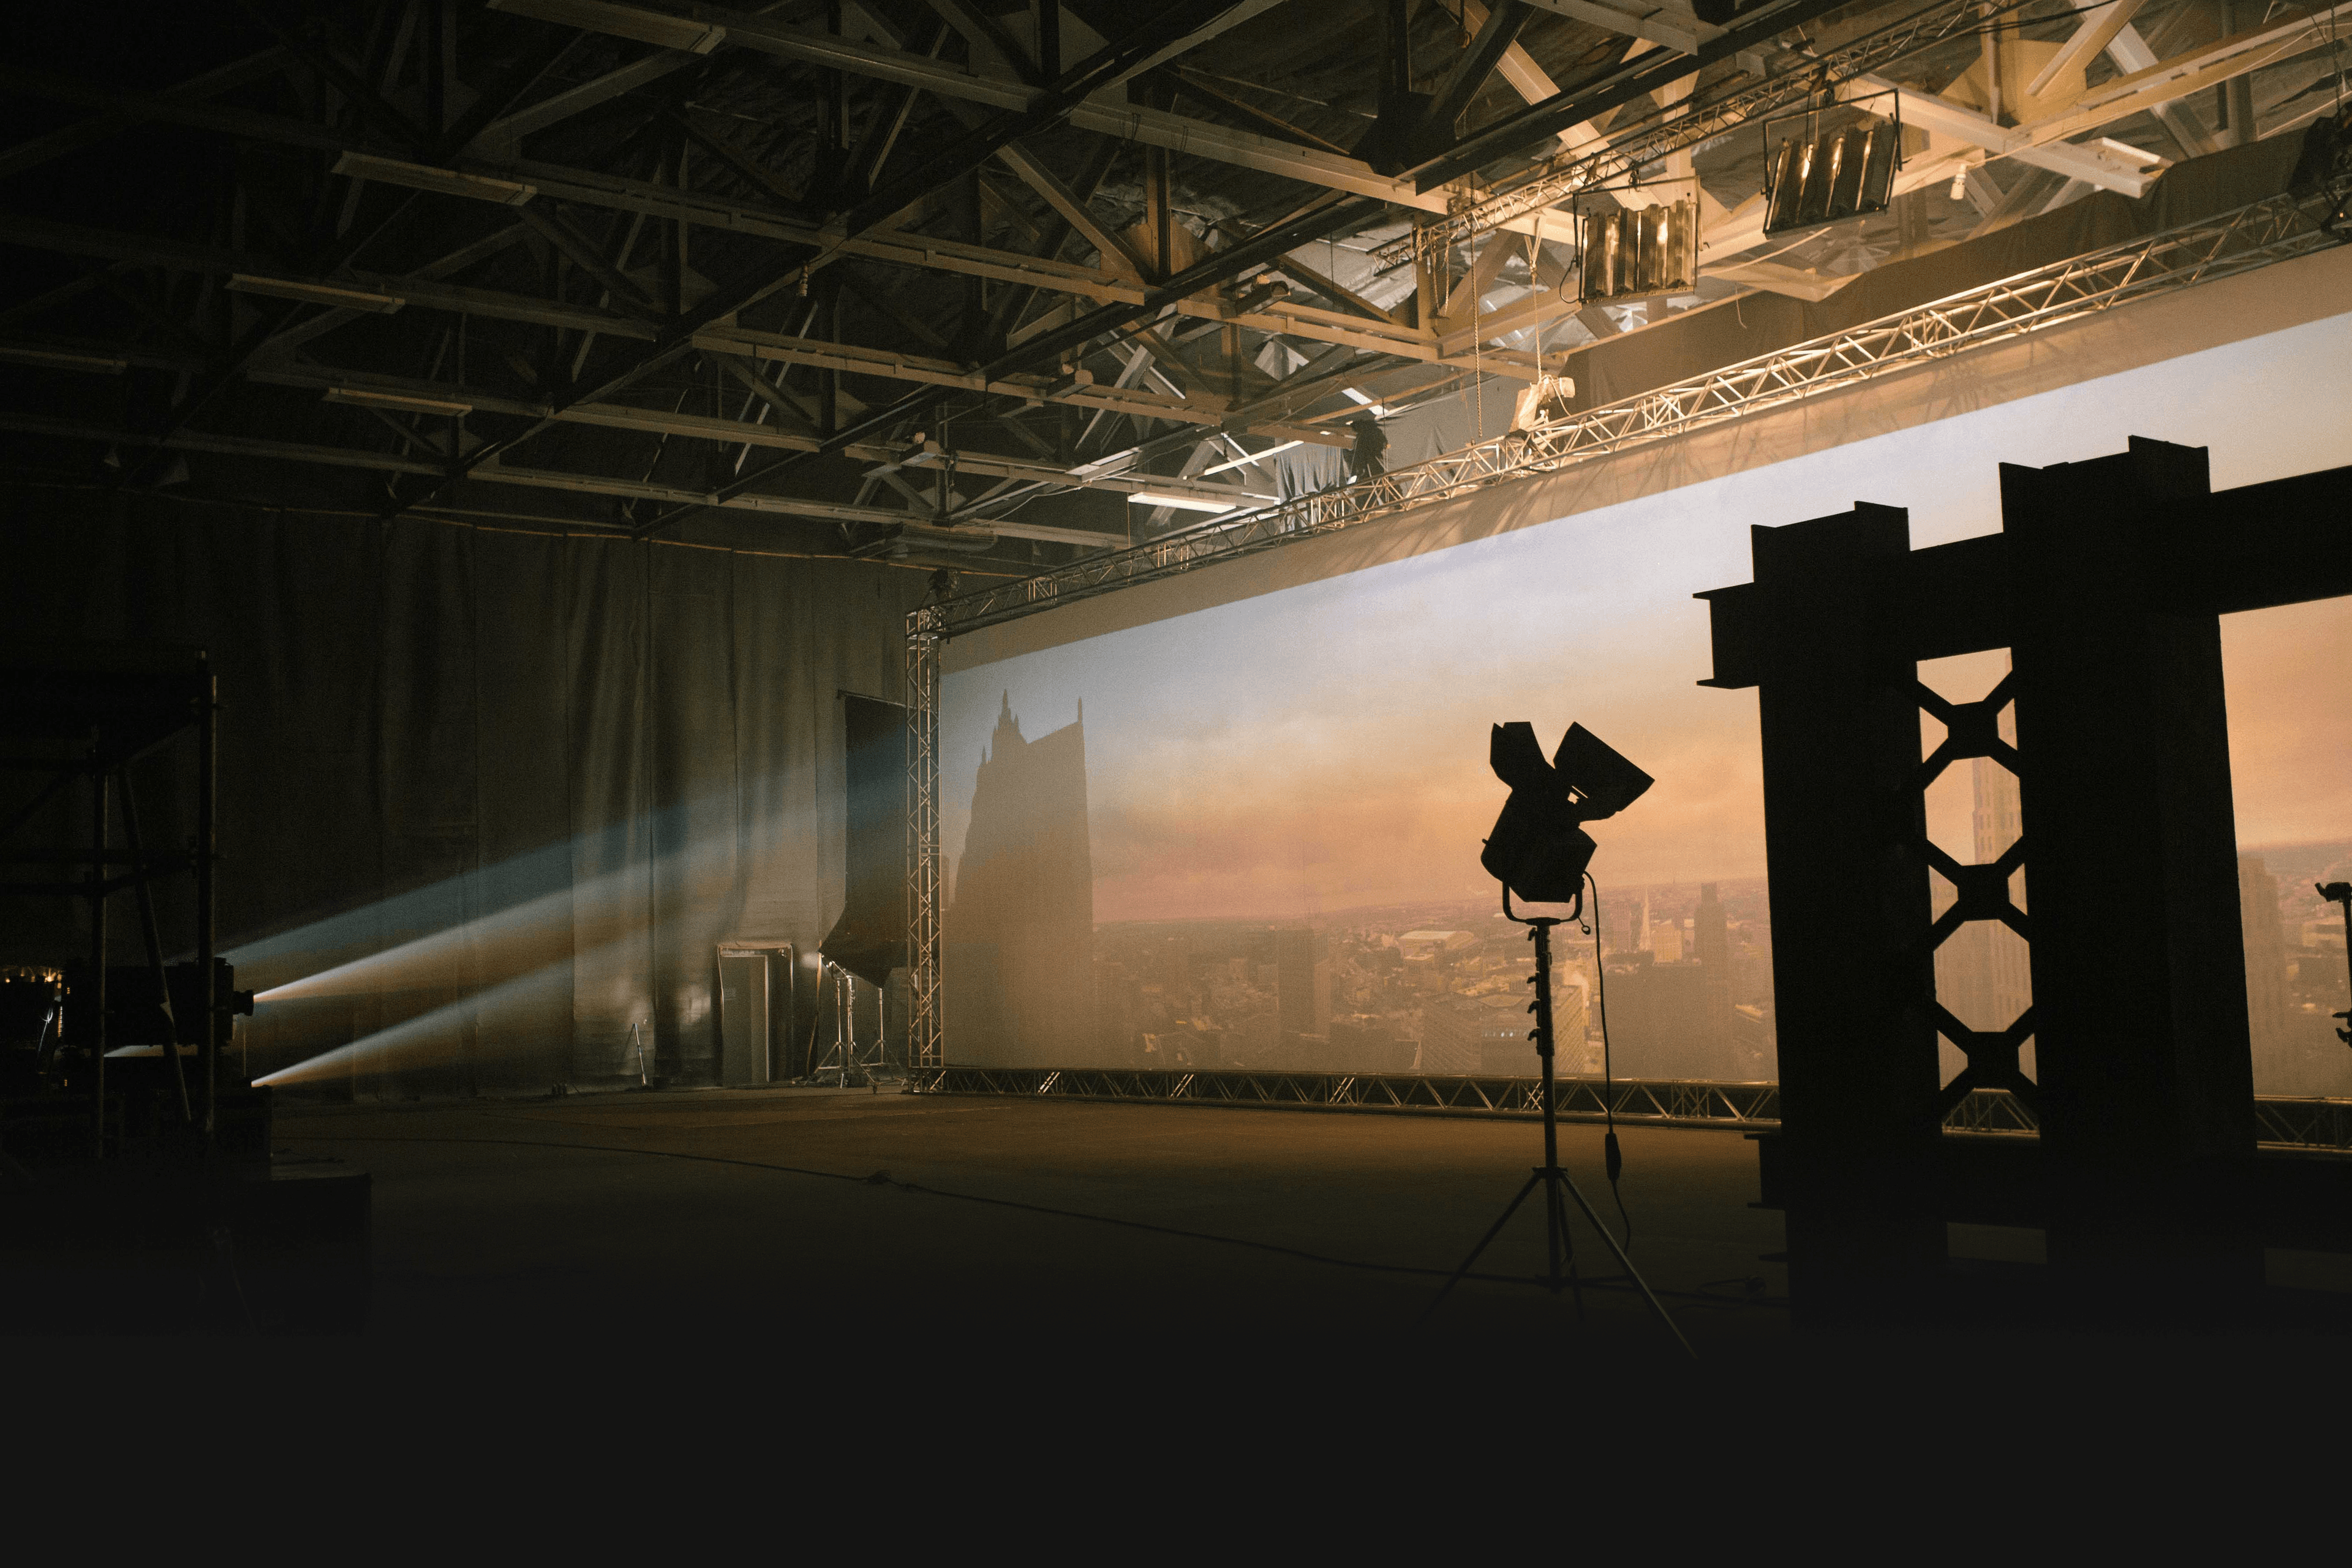 Panoramic rear projection backdrop for Christine & the Queens’ music video “Girlfriend”, demonstrating Screenberry's advanced capabilities for TV & Cinema production